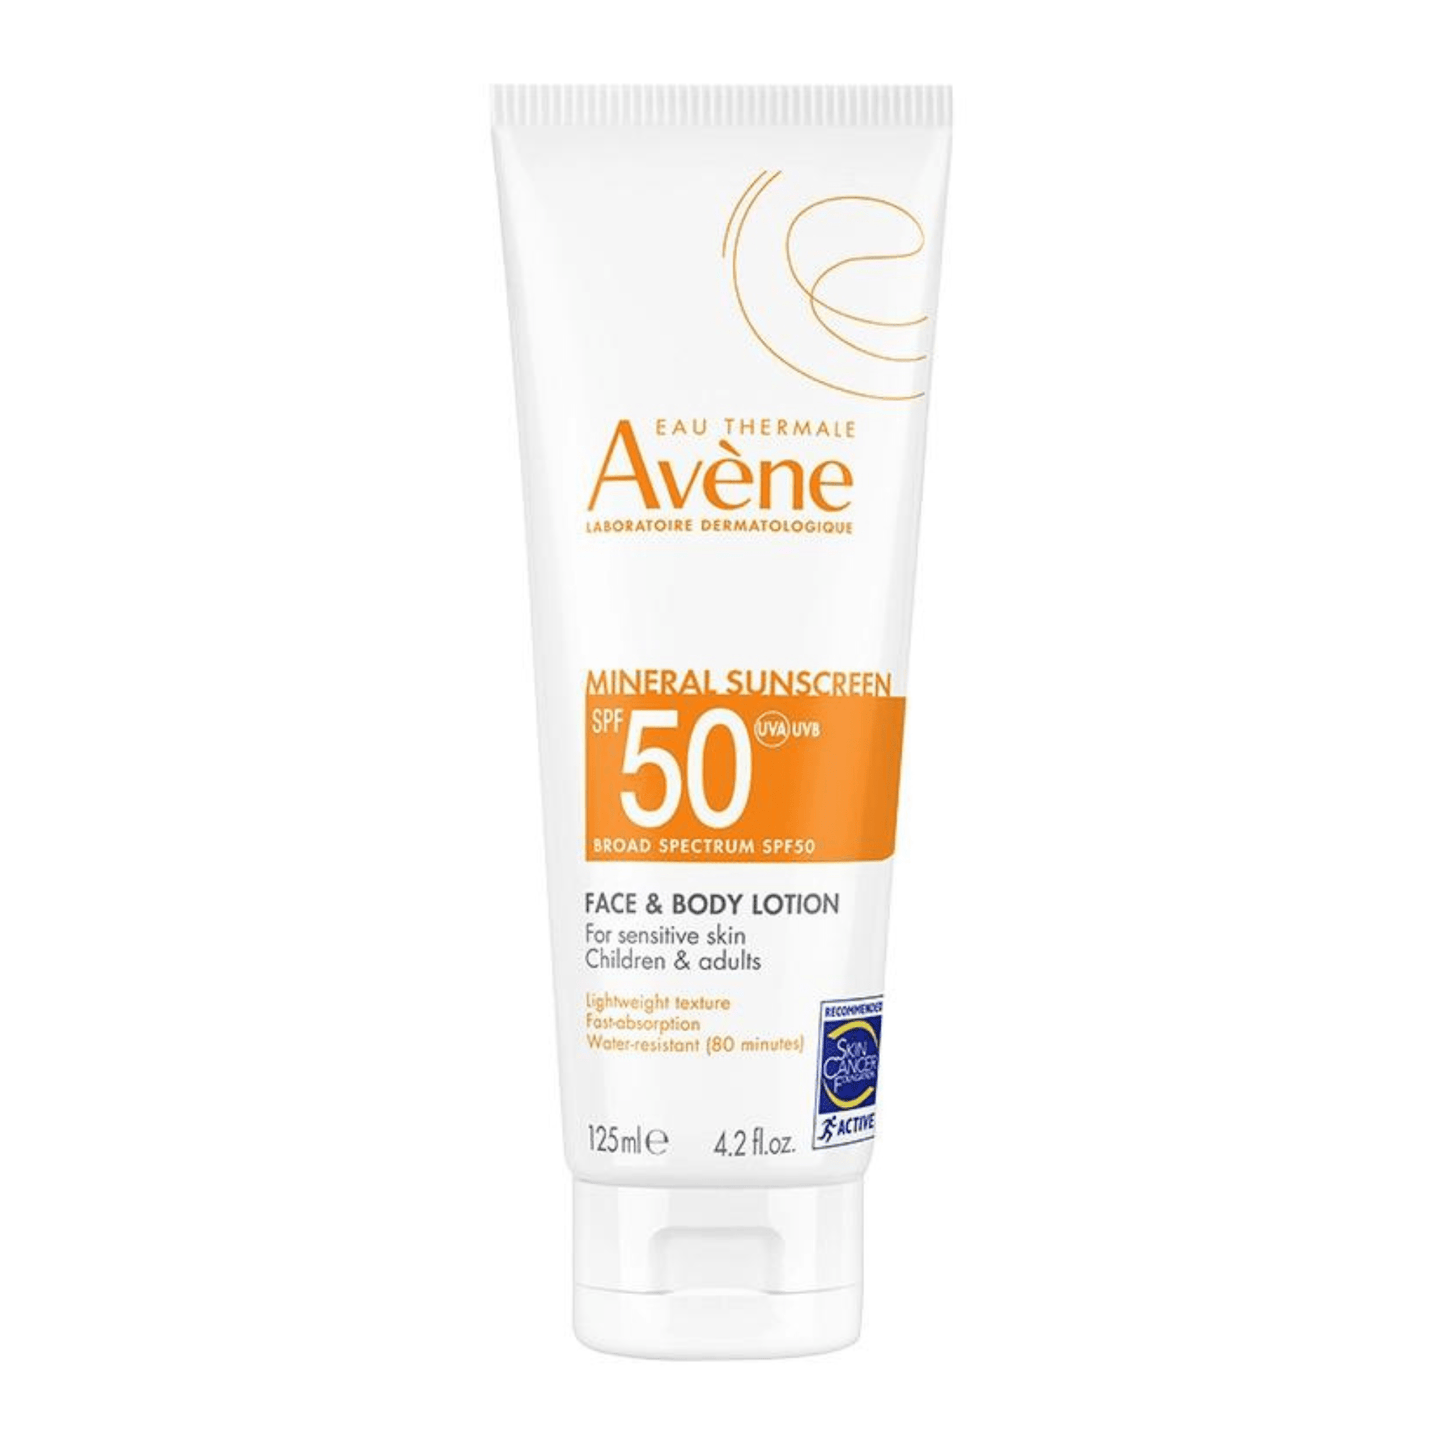 Primary Image of SPF 50 Mineral Sunscreen